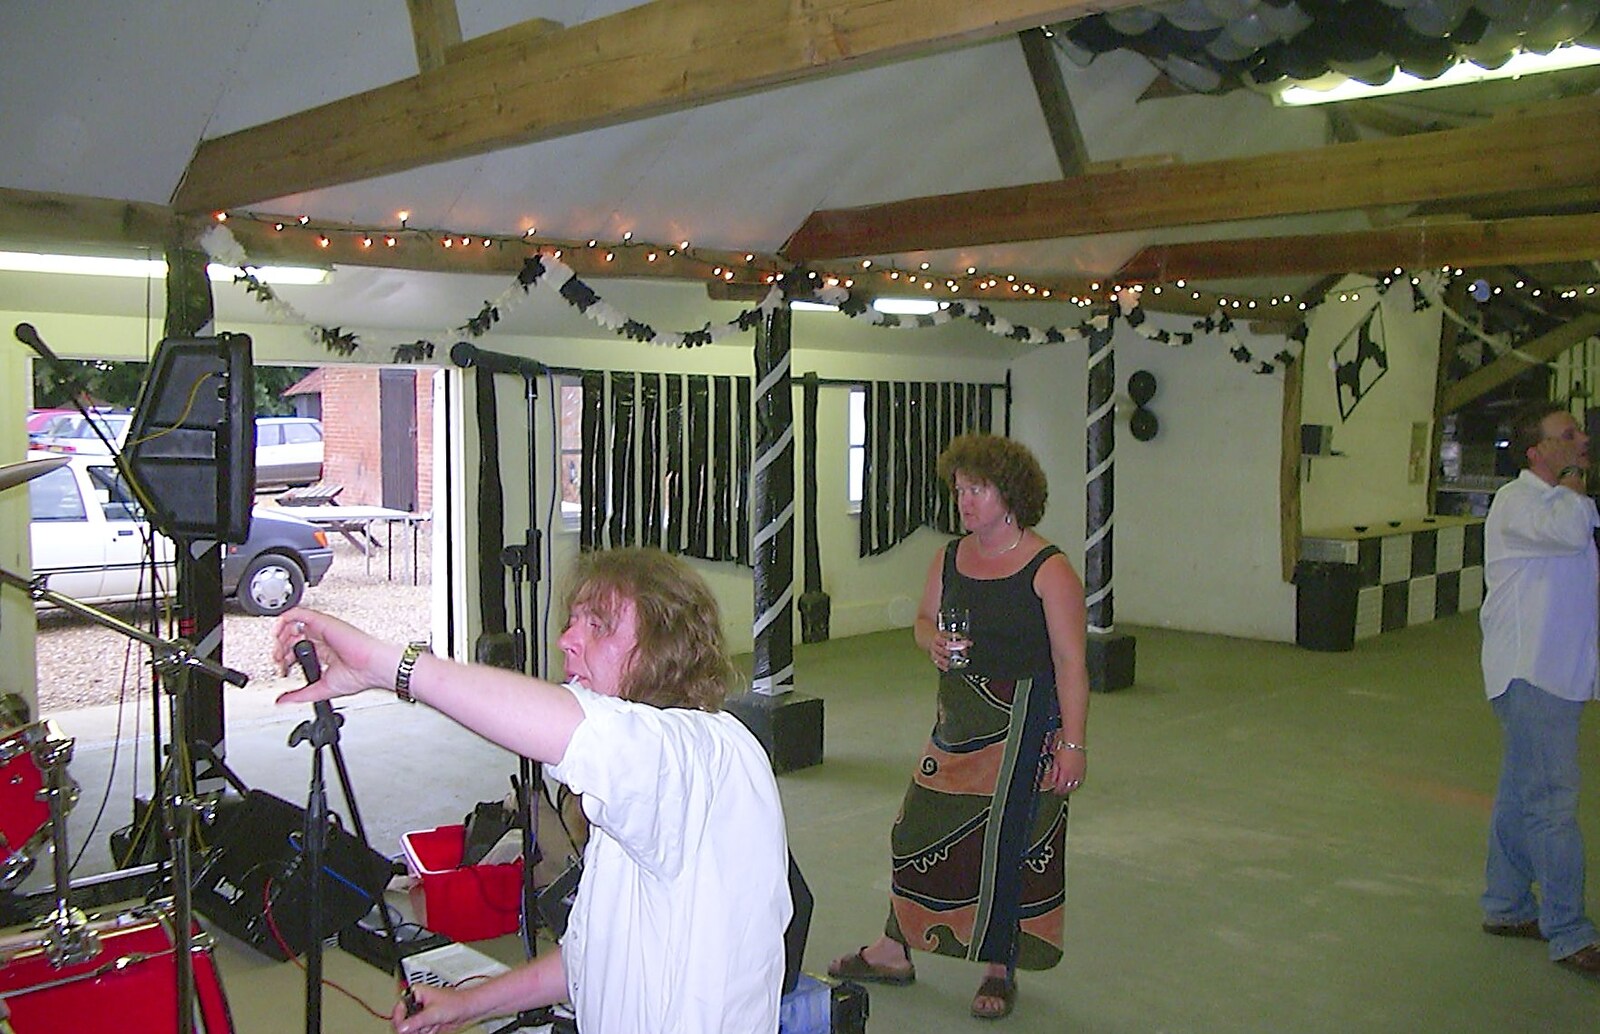 Max adjusts a mic stand as Jo waits from The BBs at Great Ellingham, Norfolk - 18th July 2003